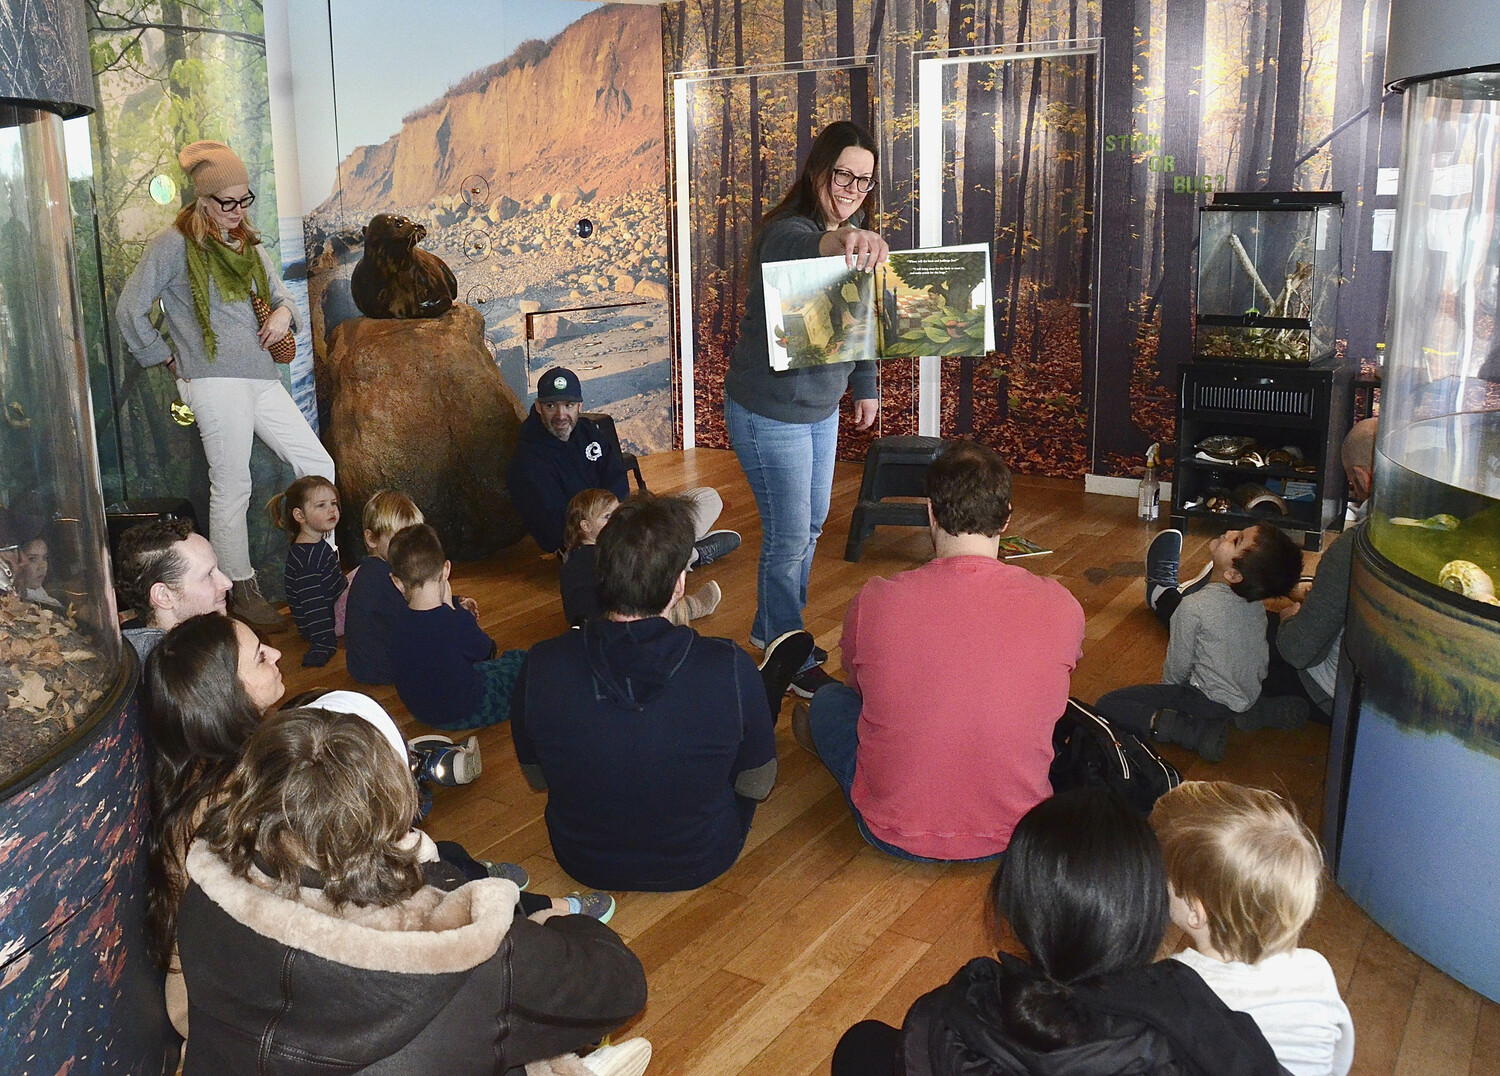 Kids of all ages enjoyed story time with Crystal Possehl-Oakes and learned about salamanders at the South Fork Natural History Museum on Sunday.  KYRIL BROMLEY